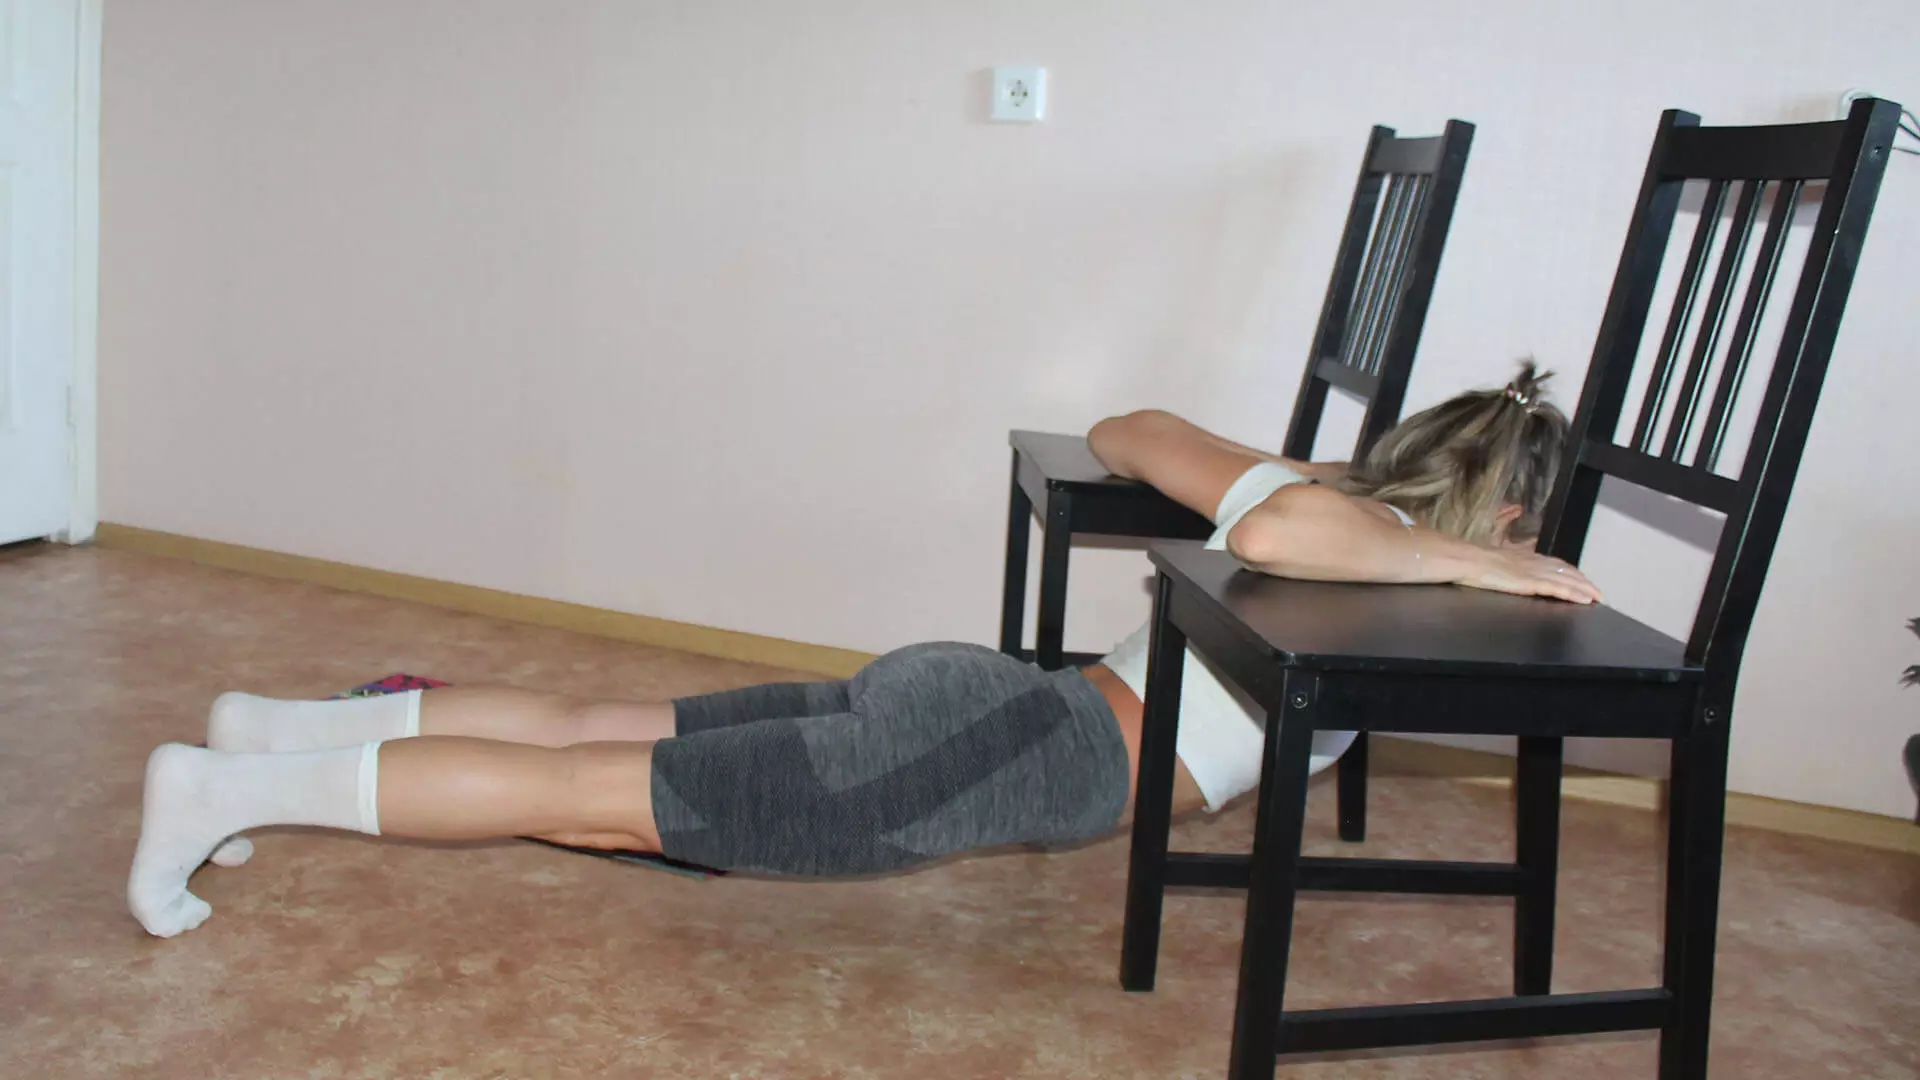 Stretching the pectoralis minor and pectoralis major with chairs: exercise photo.